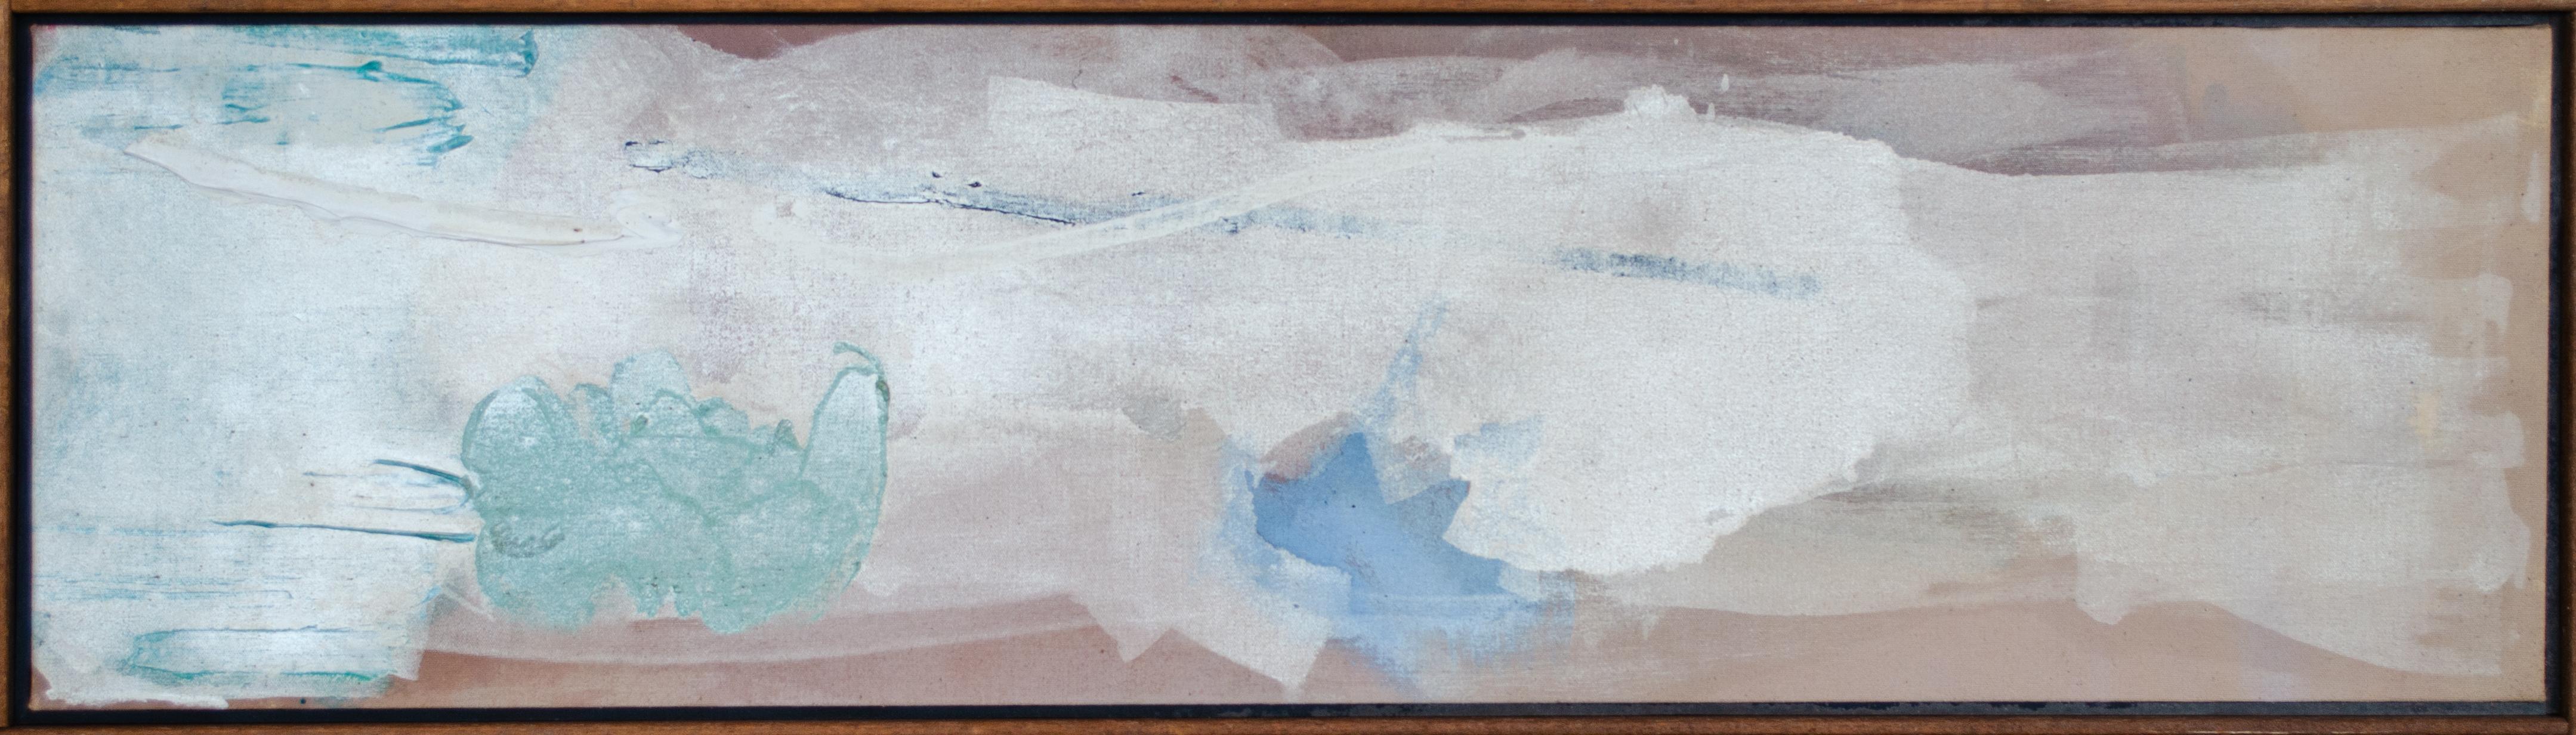 SHERRON FRANCIS (AMERICAN, B. 1940)
Untitled, circa 1980
Acrylic on canvas
12 1/2 x 45 inches
Signed on the reverse

A reappraisal is long overdue for the second-generation abstract expressionists. Artists such as Helen Frankenthaler, Morris Louis,